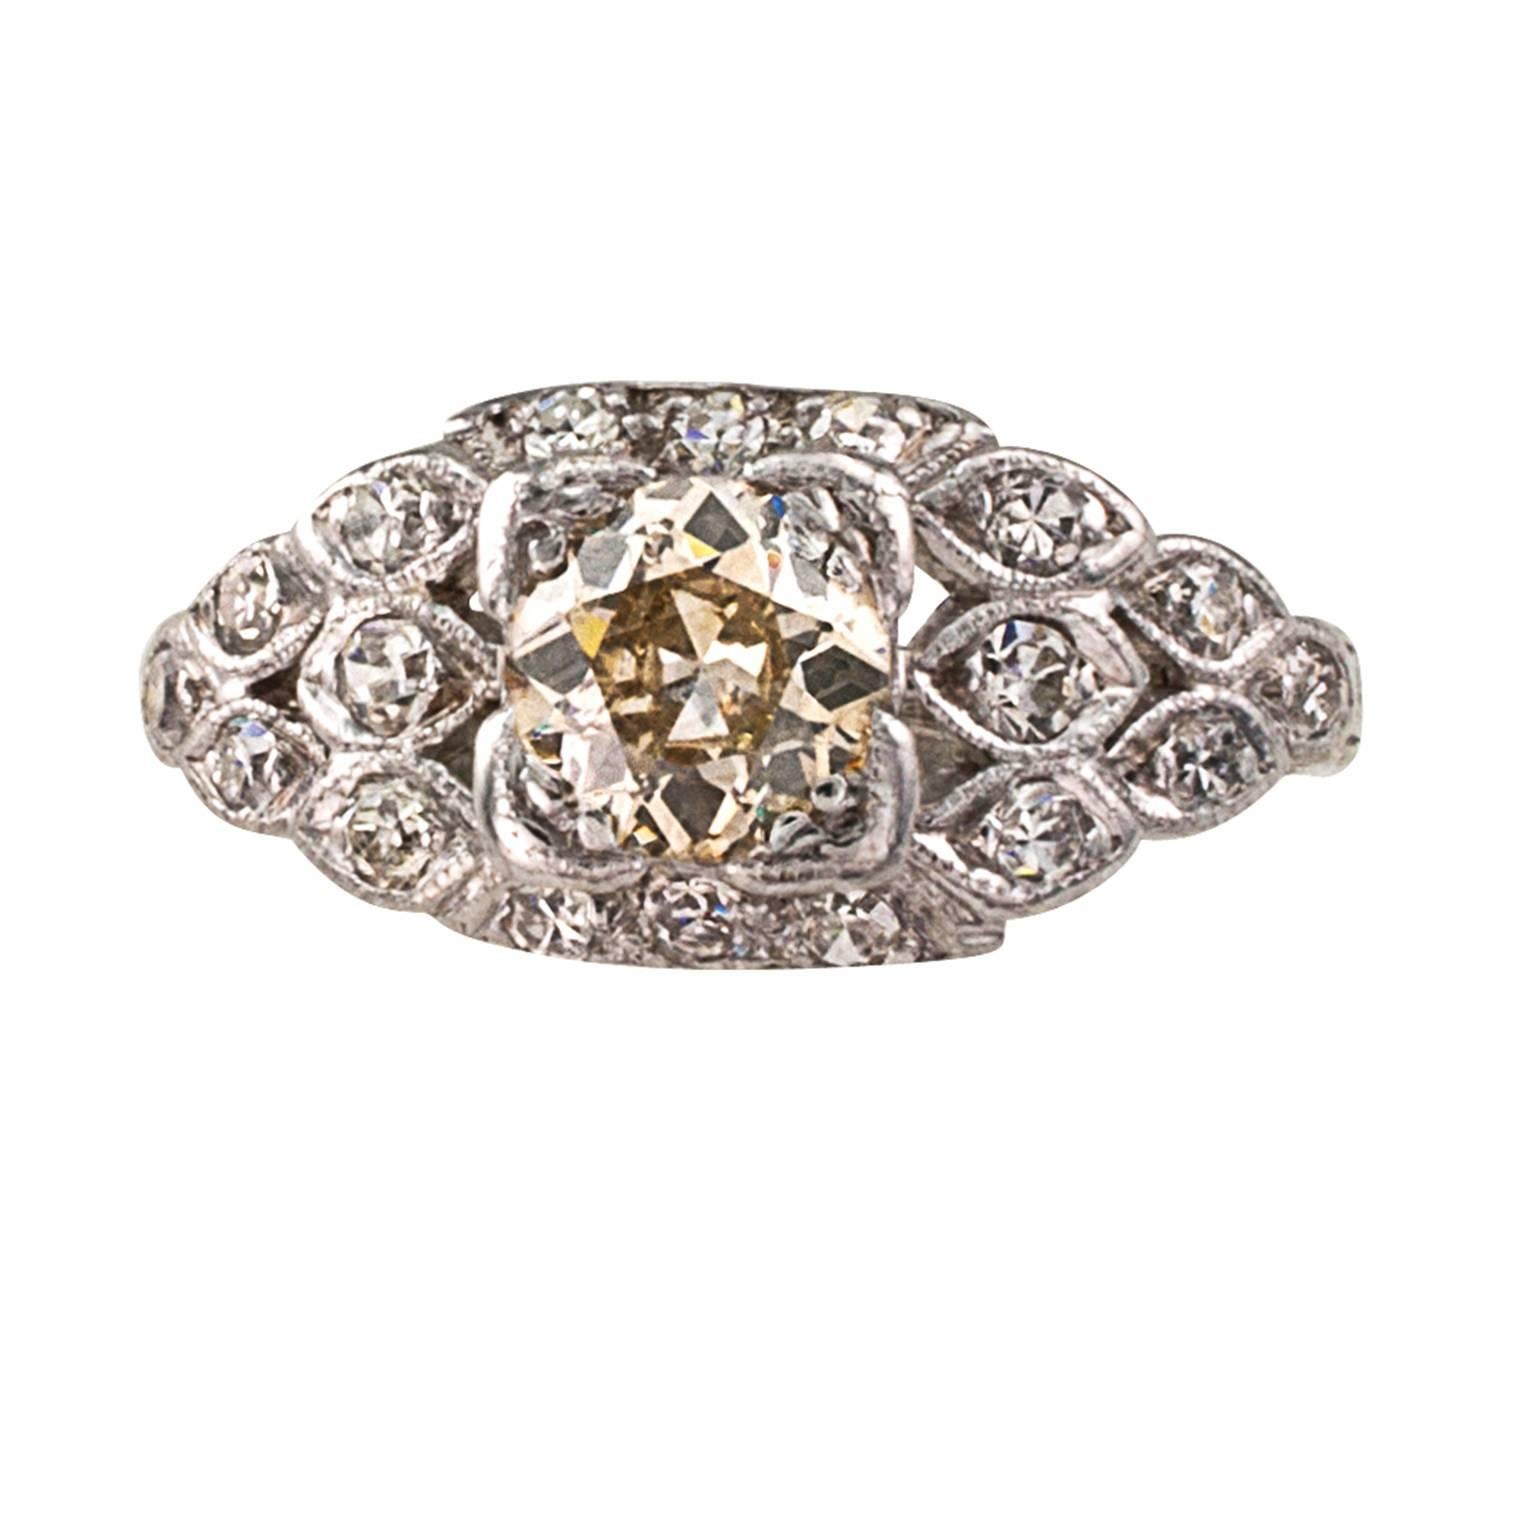 .65 Carat Yellow-brown Old European-cut Diamond Ring

Natural color diamonds are so special,  so different.  In an Art Deco mount, such as this, where eighteen smaller round white diamonds accentuate the color difference between themselves and the